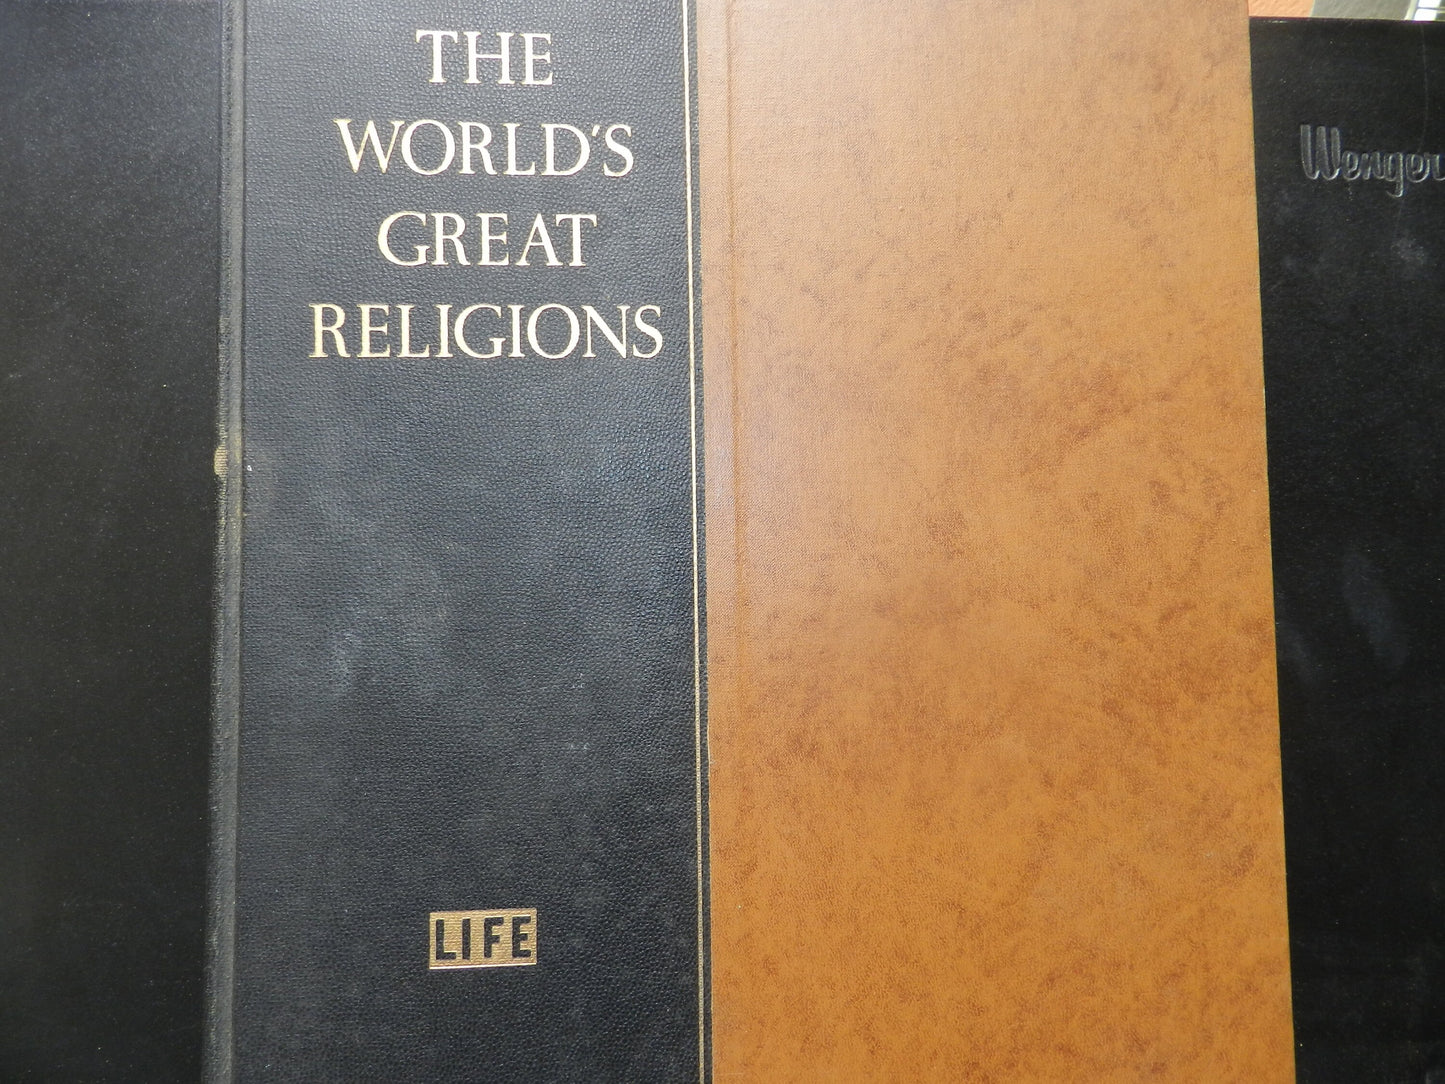 Vintage 1st ed "The Worlds Great Religions" Book 1957